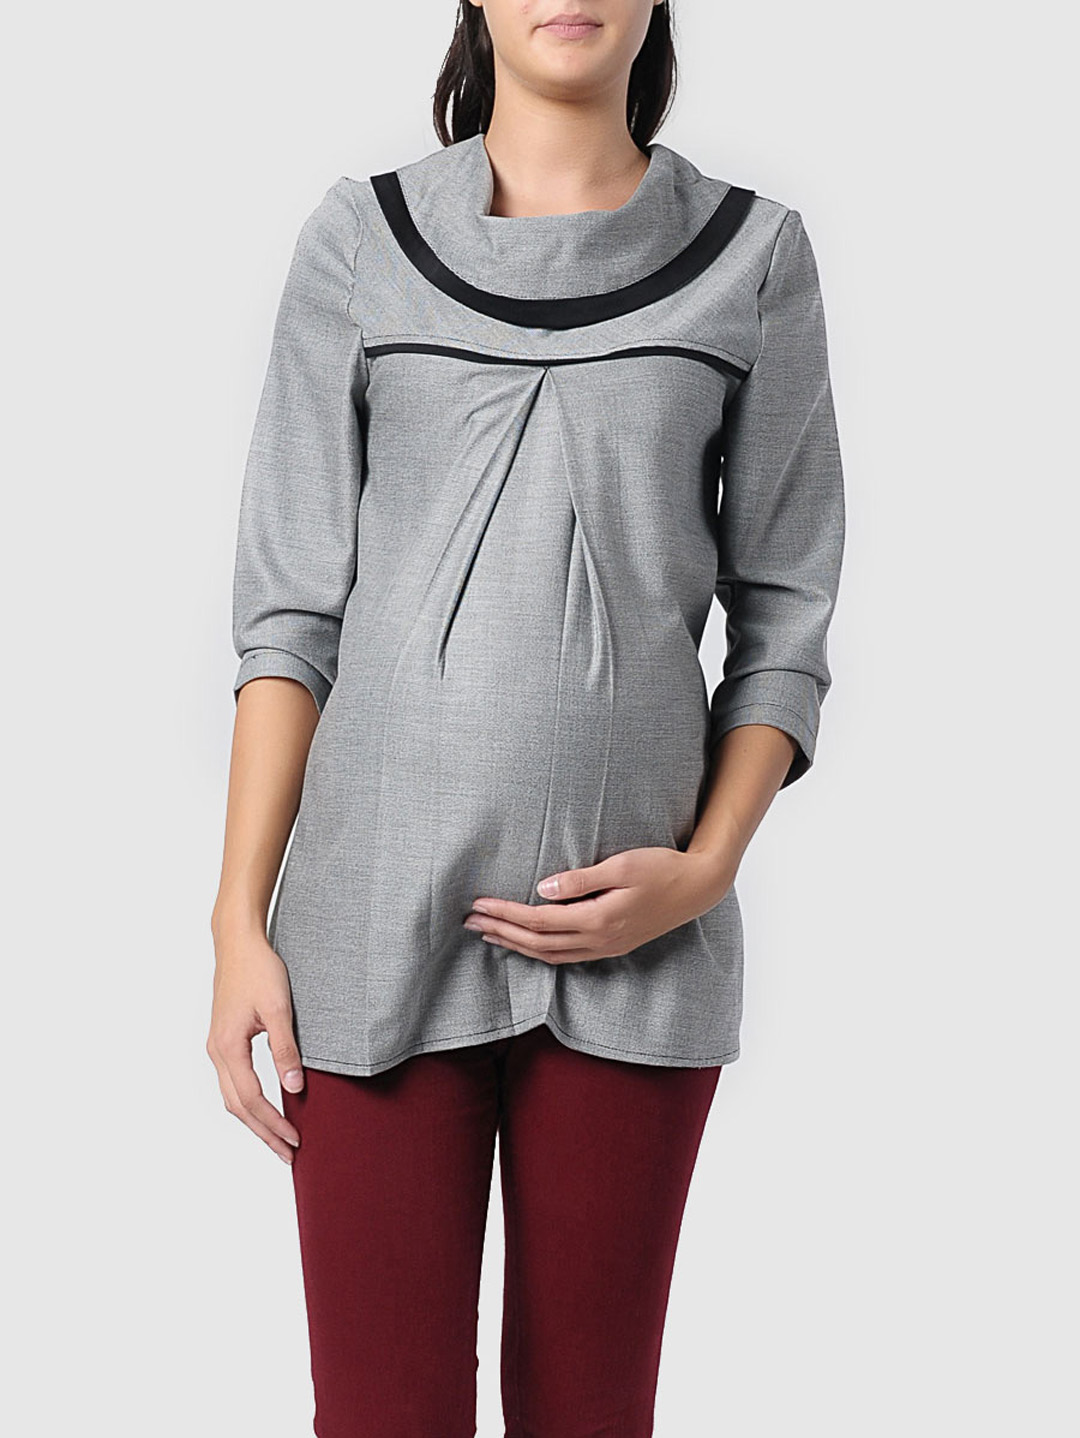 Maternity Wear Clothes Collection 2013 | Maternity Tops Tunics Dresses